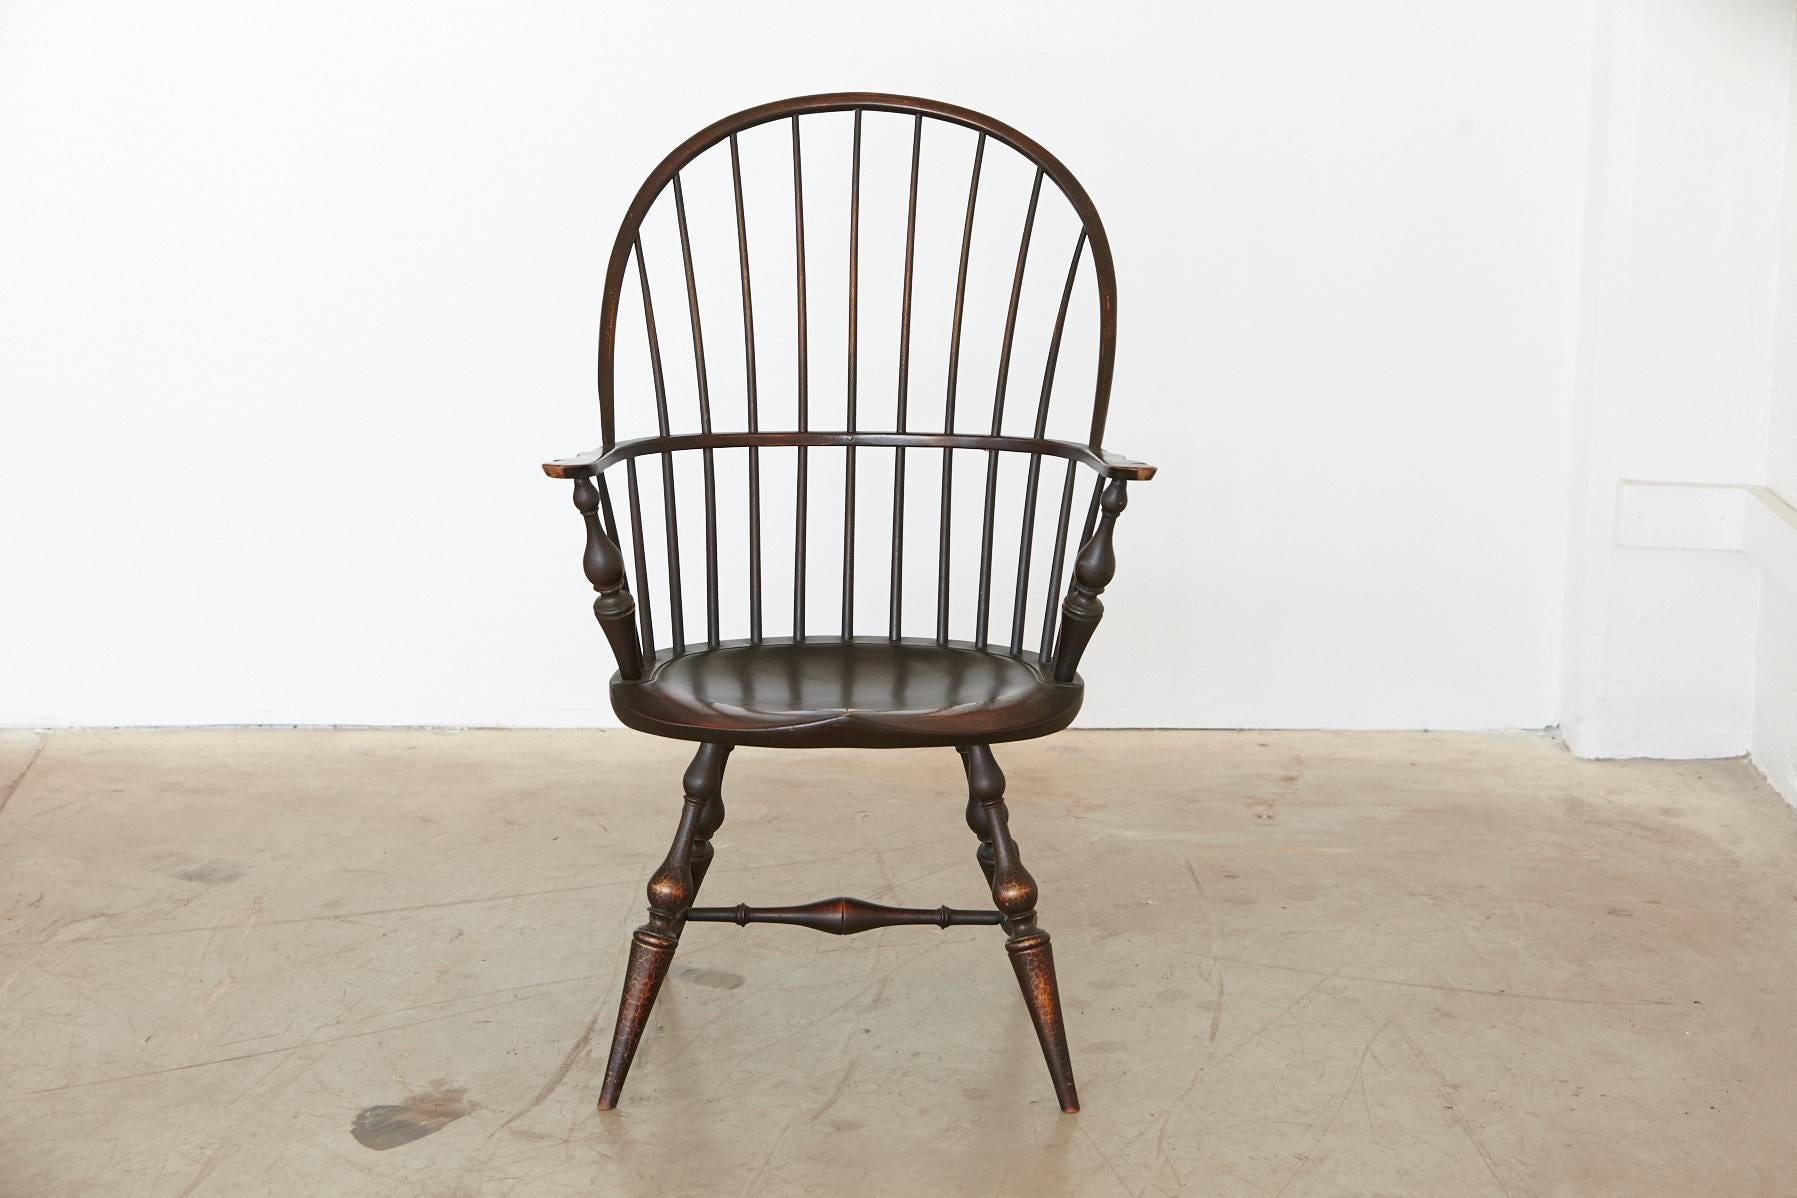 Vintage maple bowback Windsor armchair finished in black crackle. This chair from the 1960s was manufactured by the American furniture company D.R. Dimes.
Dimes have a long history in crafting museum quality reproductions of American furniture.